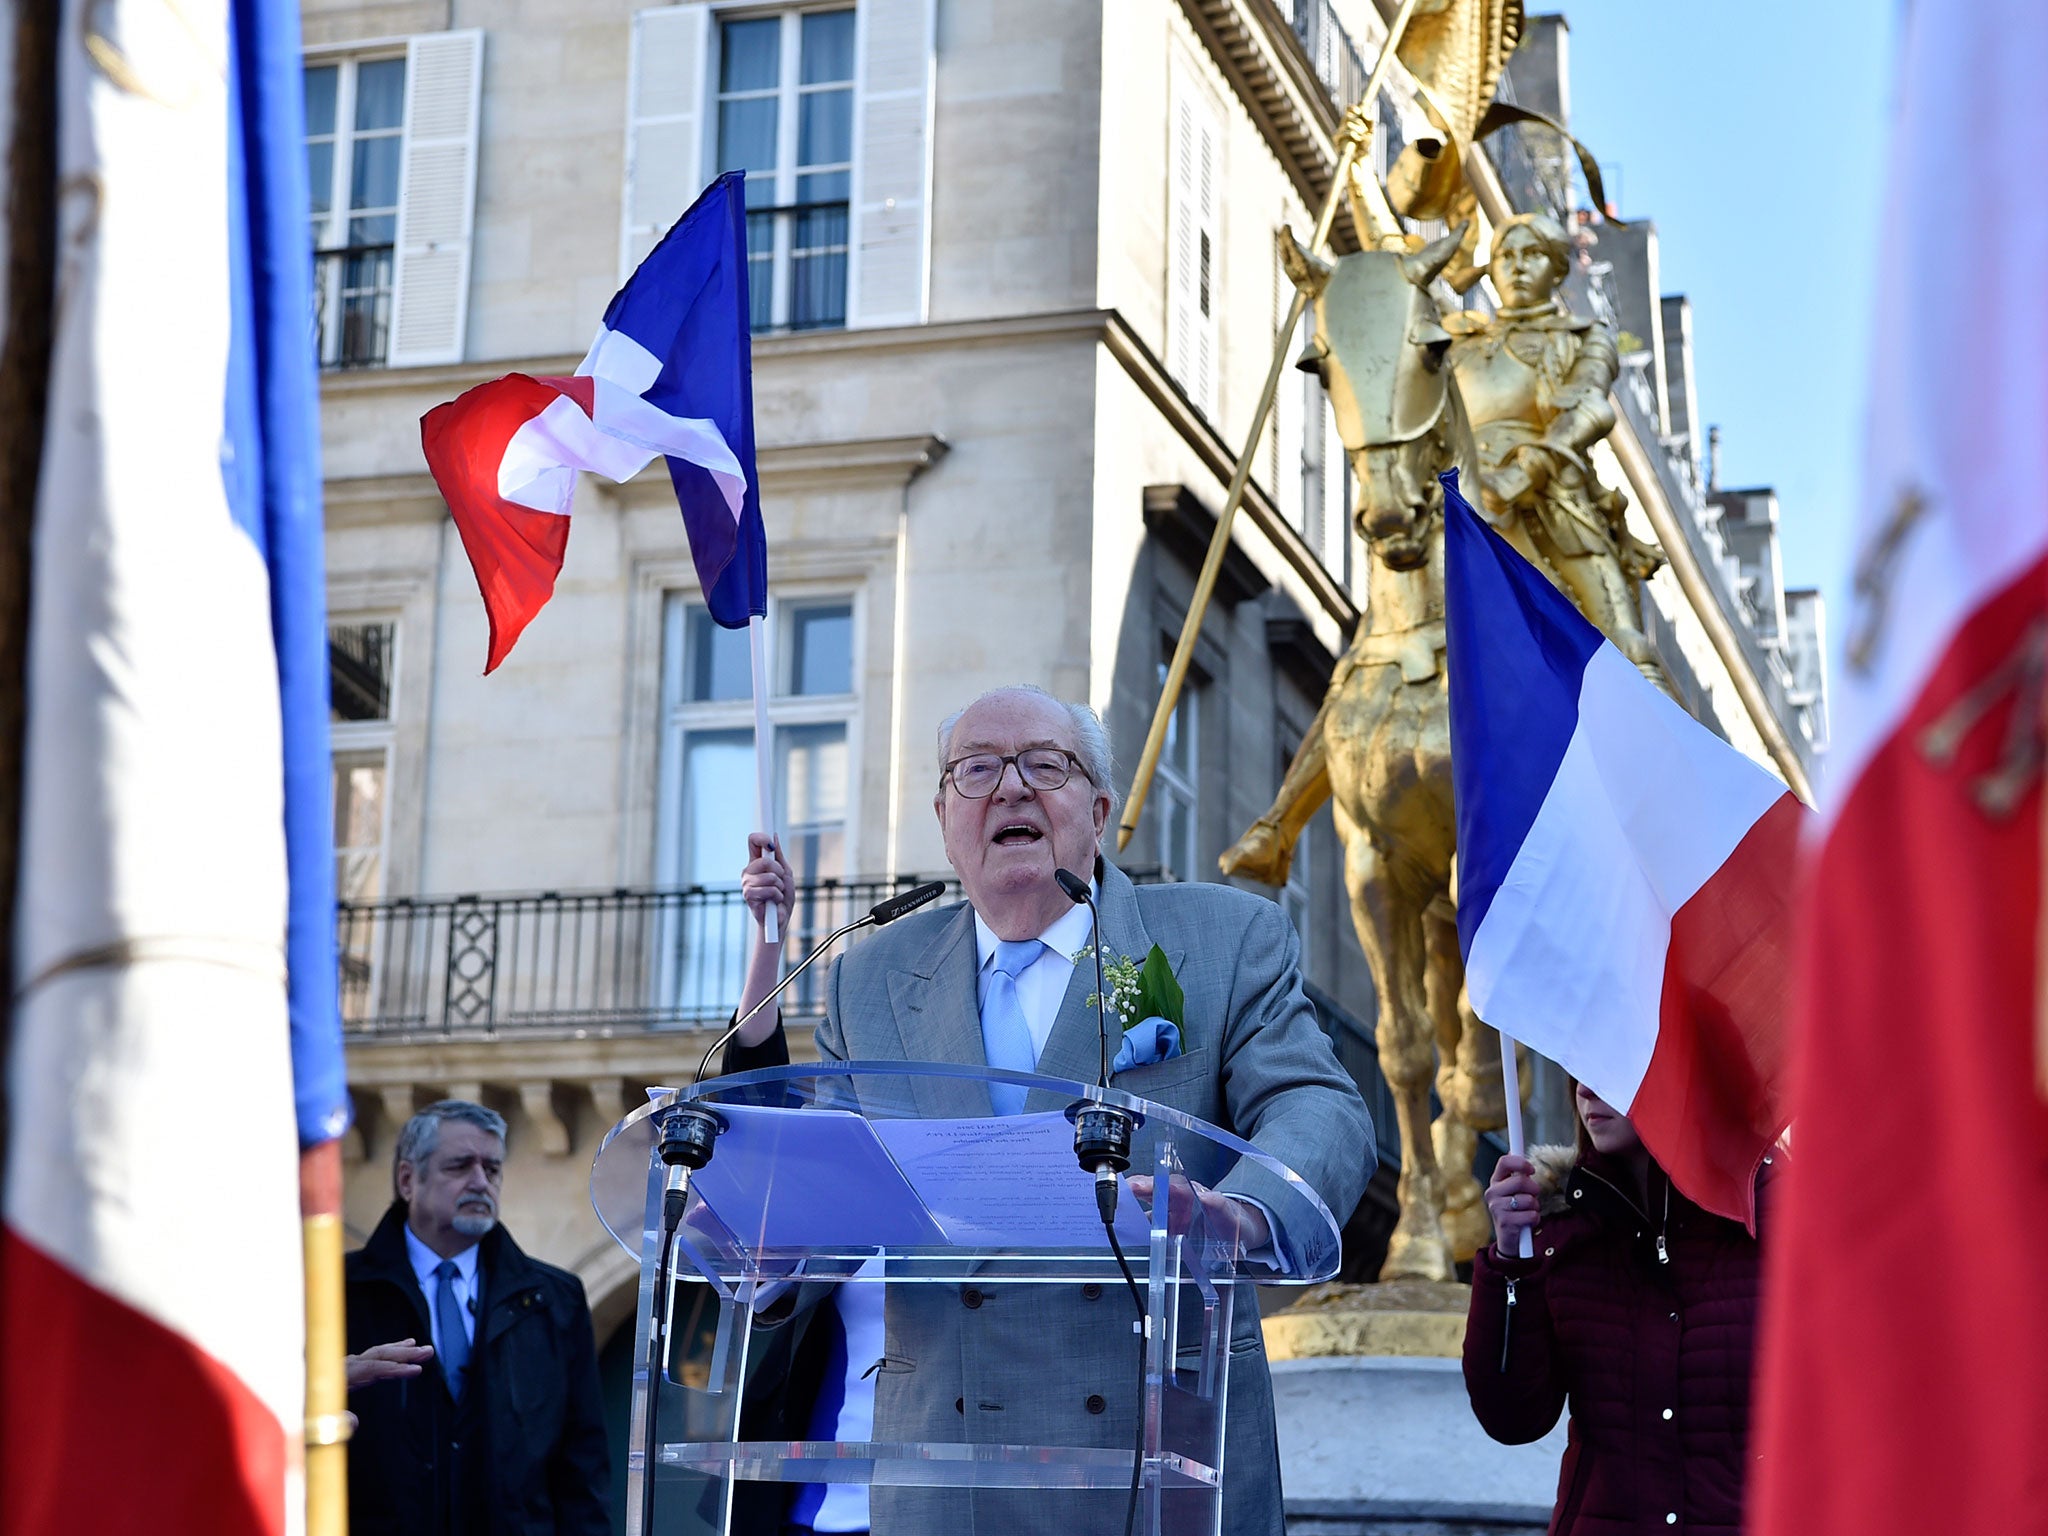 Jean-Marie Le Pen speaking at Front National celebrations in front of a statue of Joan of Arc